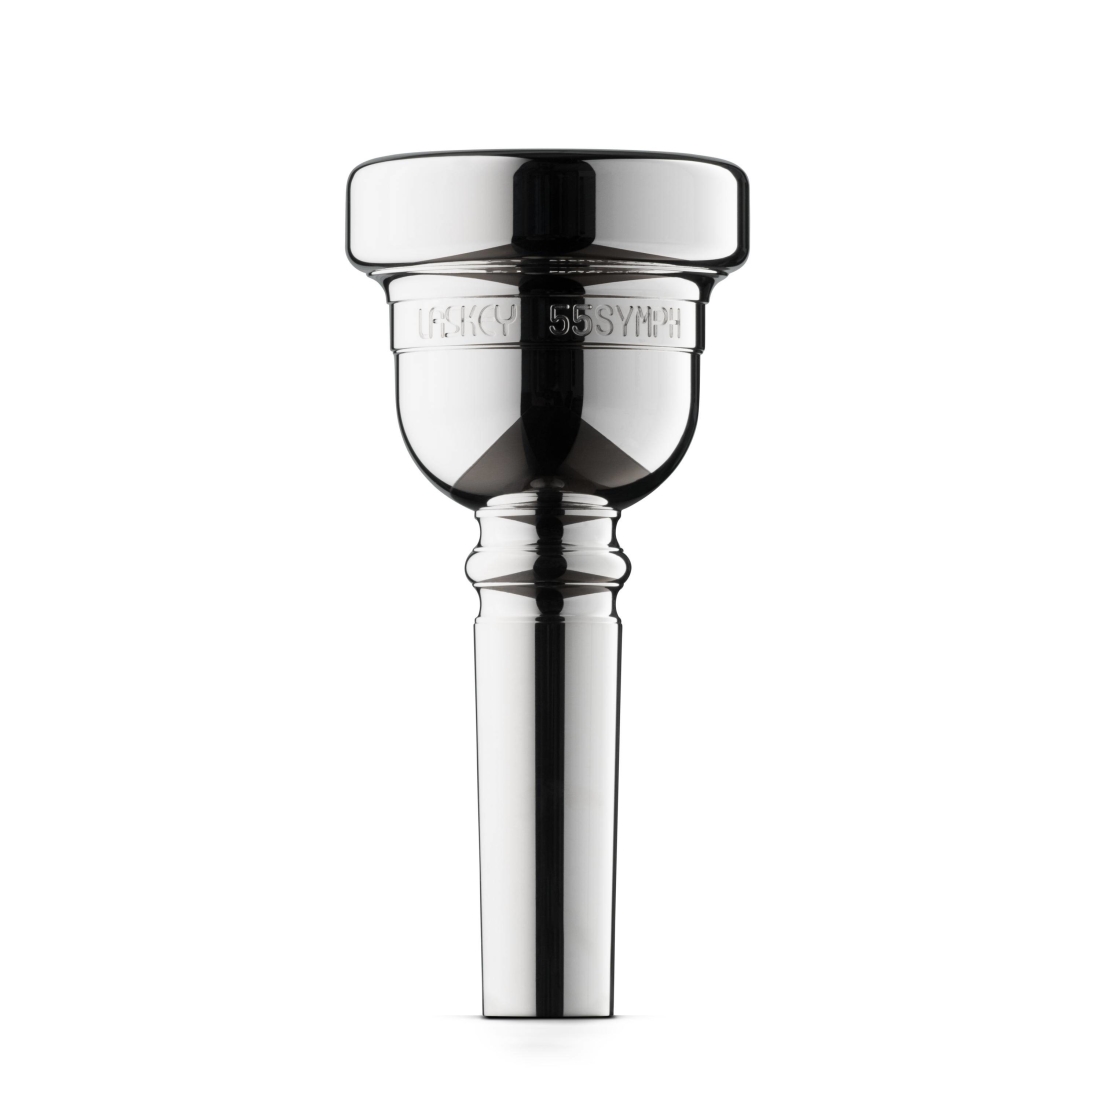 Alessi 55 SYMPH Trombone Mouthpiece - Silver Plated